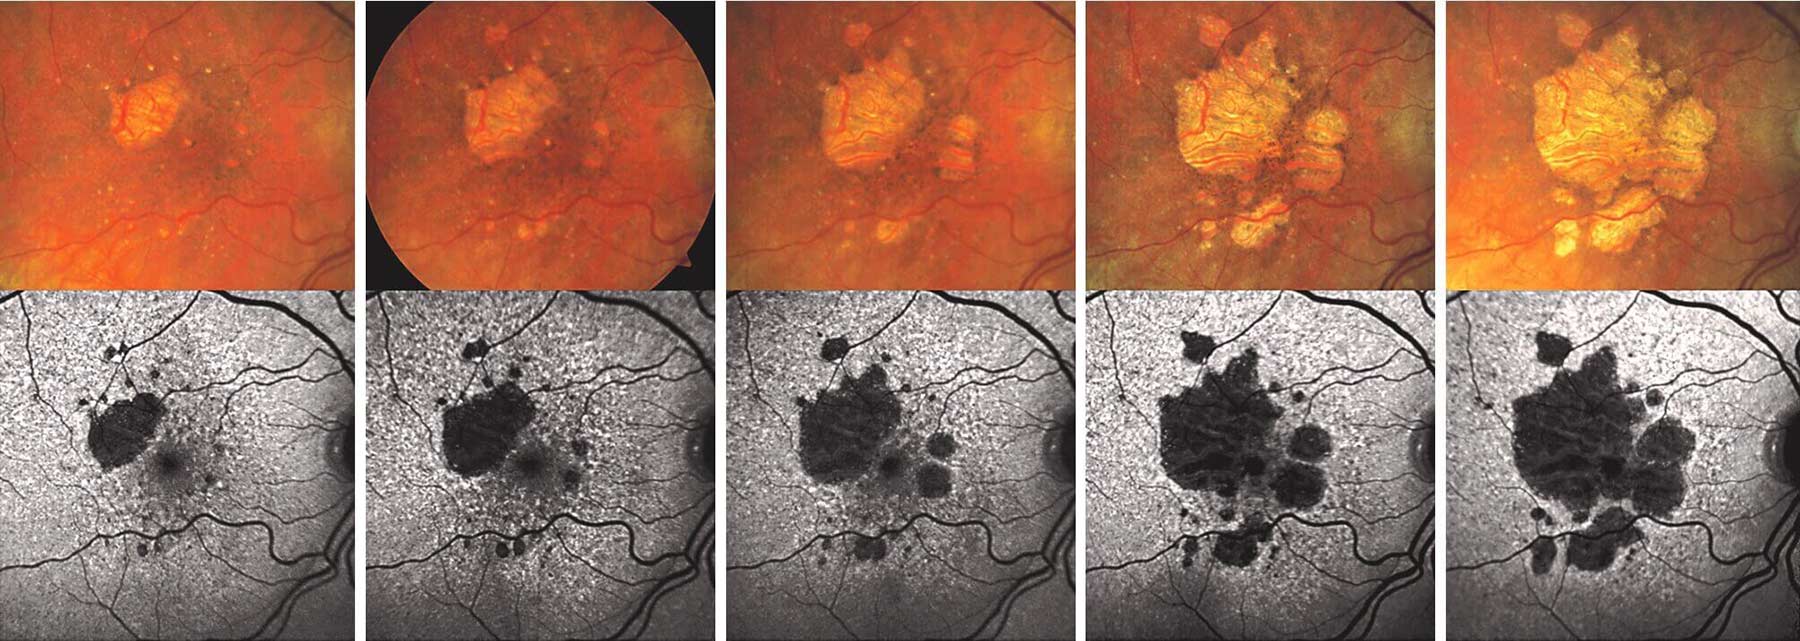 Progression of dry macular degeneration. With advanced dry macular degeneration, retinal atrophy leads to blind spots in the central vision that enlarge over time